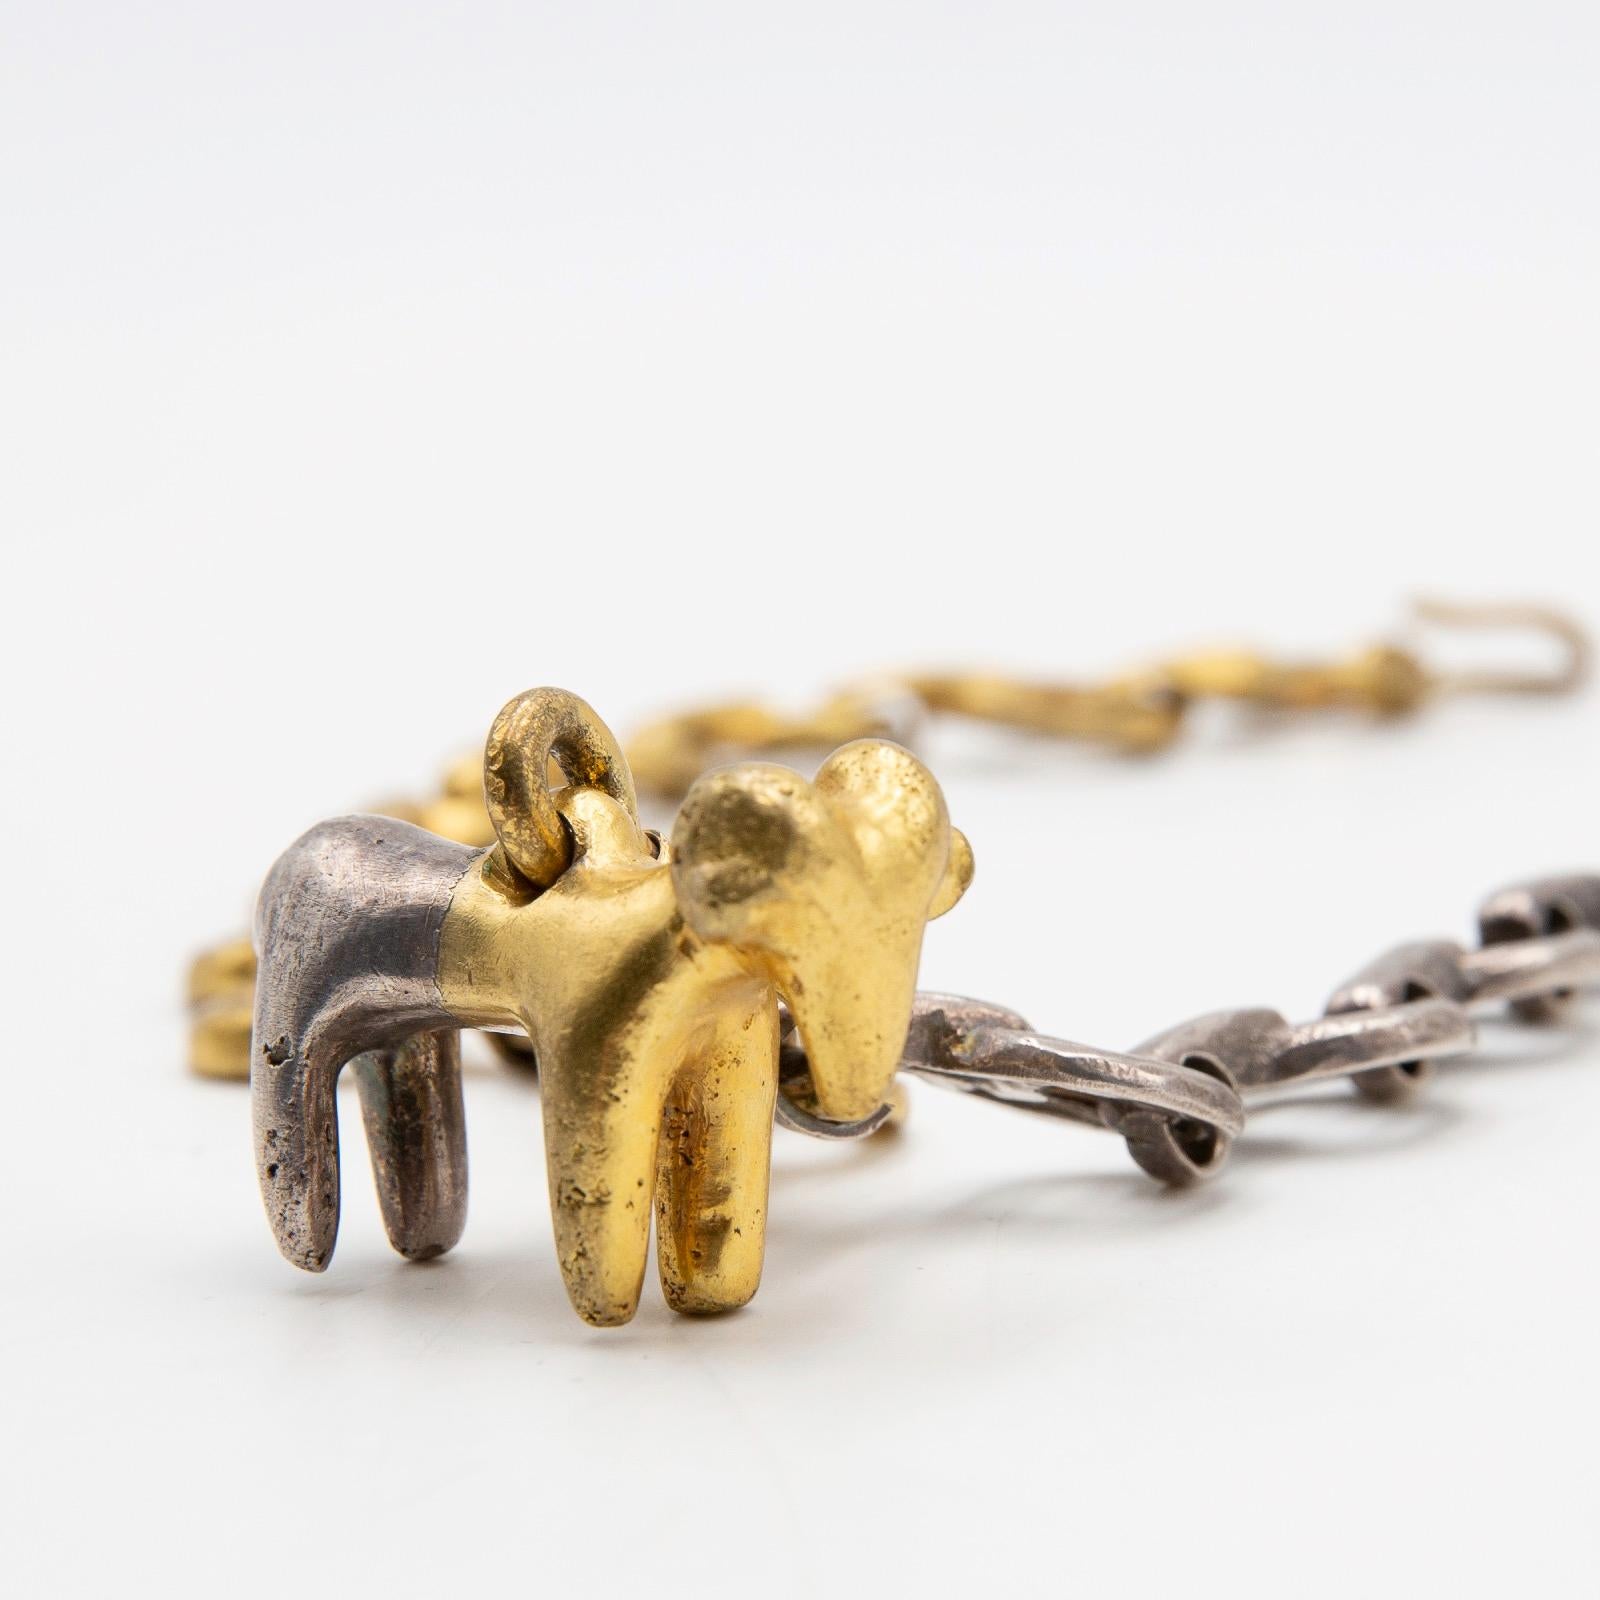 French Line Vautrin, Le Bélier 'the Ram', Iconic Gilded and Silvered Bronze Necklace